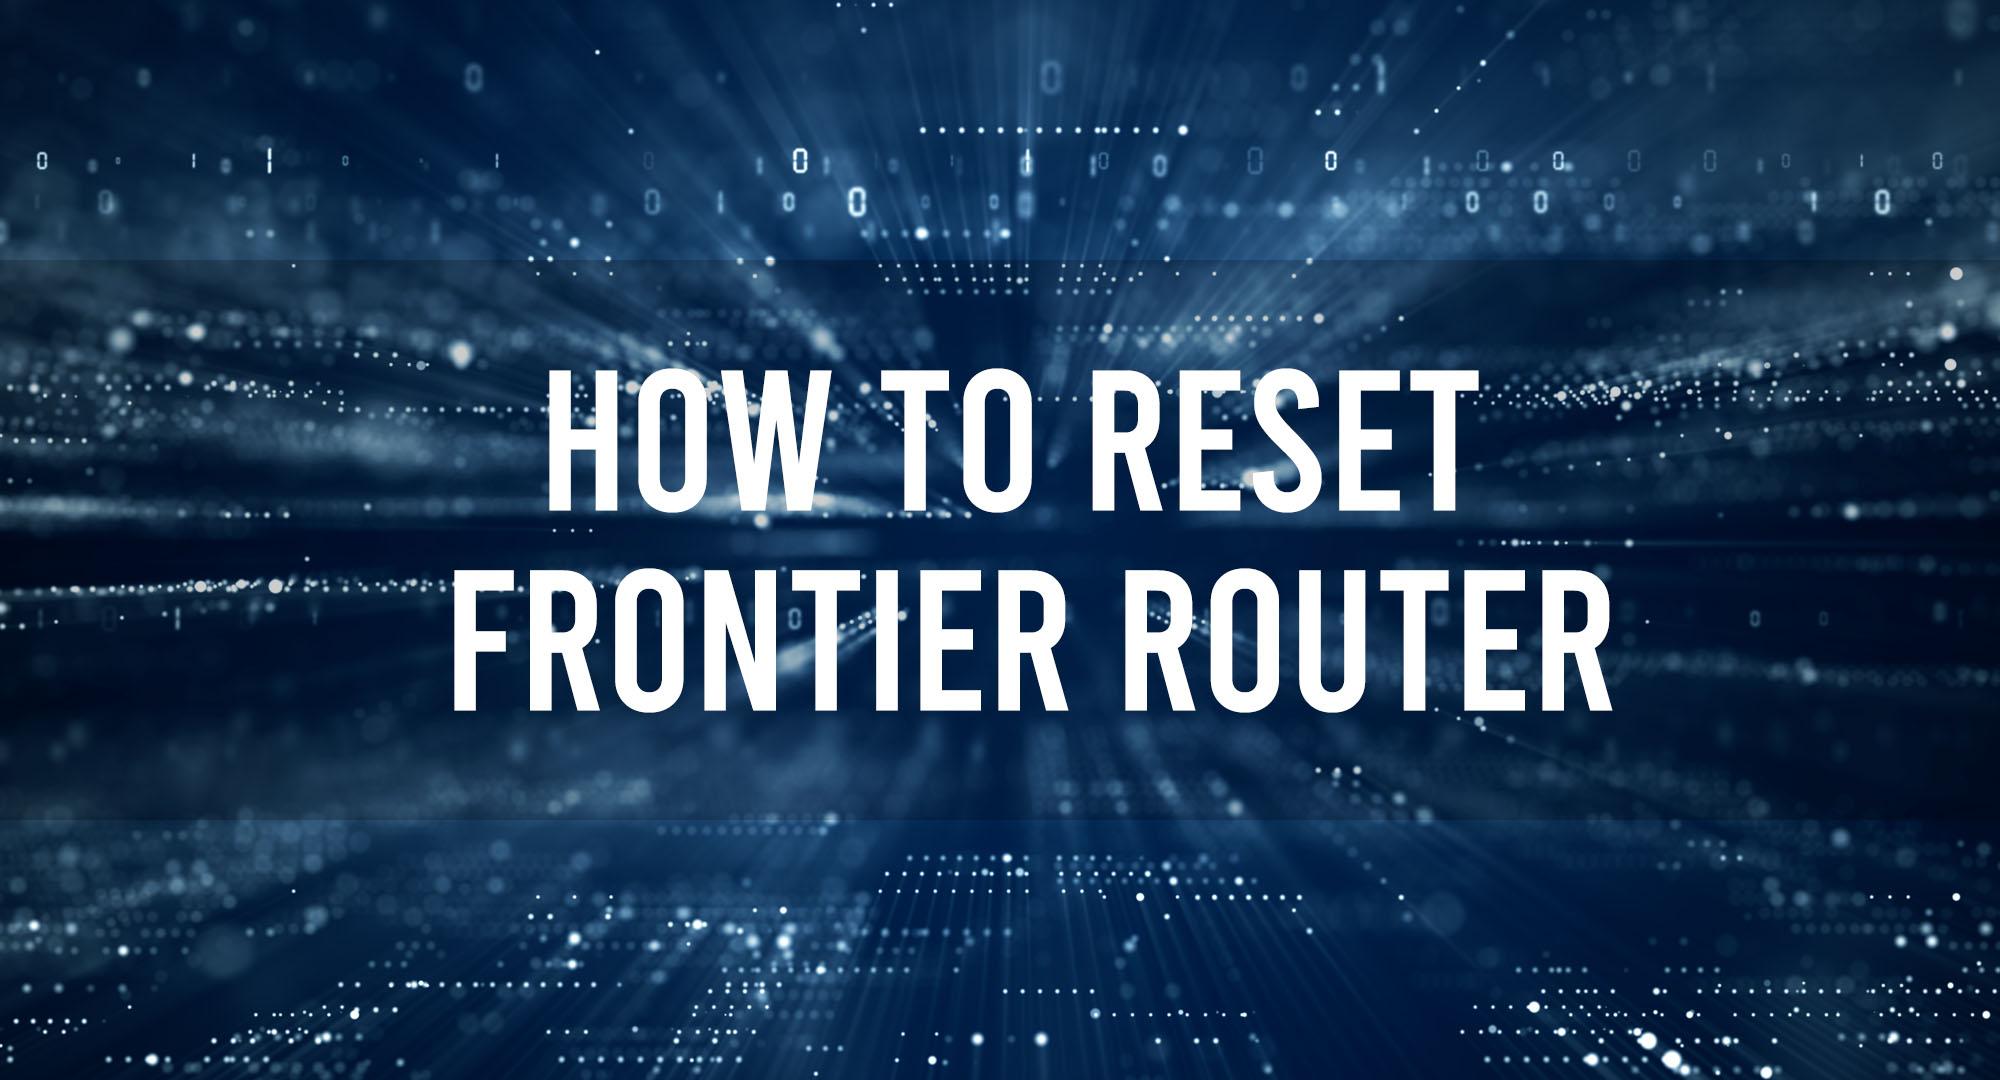 How To Reset Frontier Router